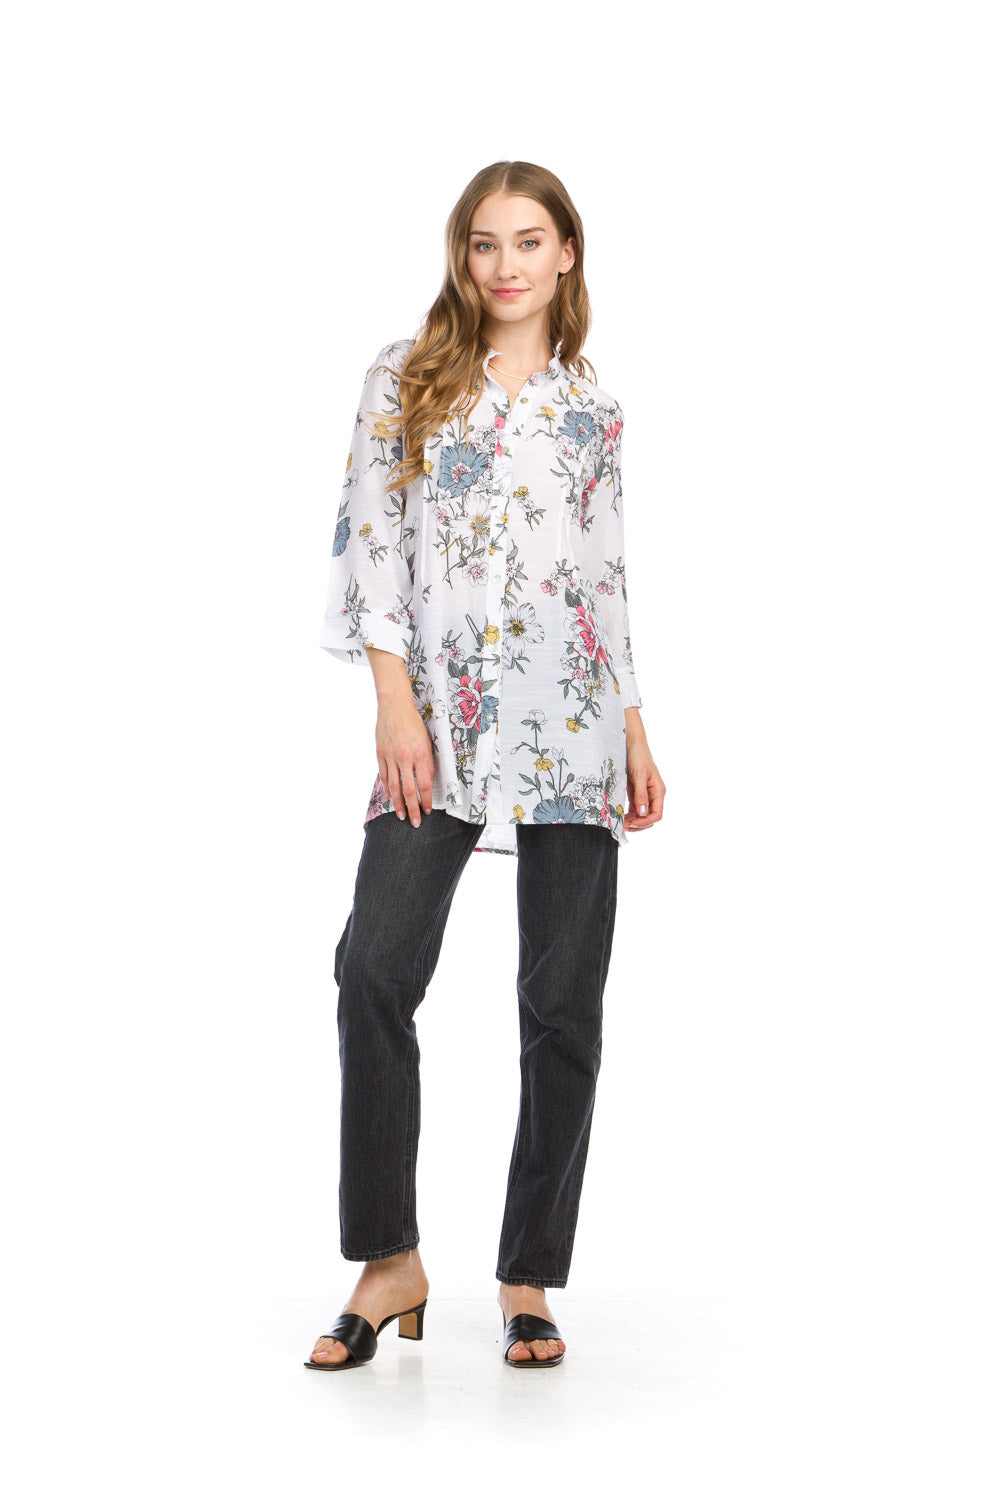 PT-16138 - FLORAL PIN TUCK BUTTON FRONT TOP